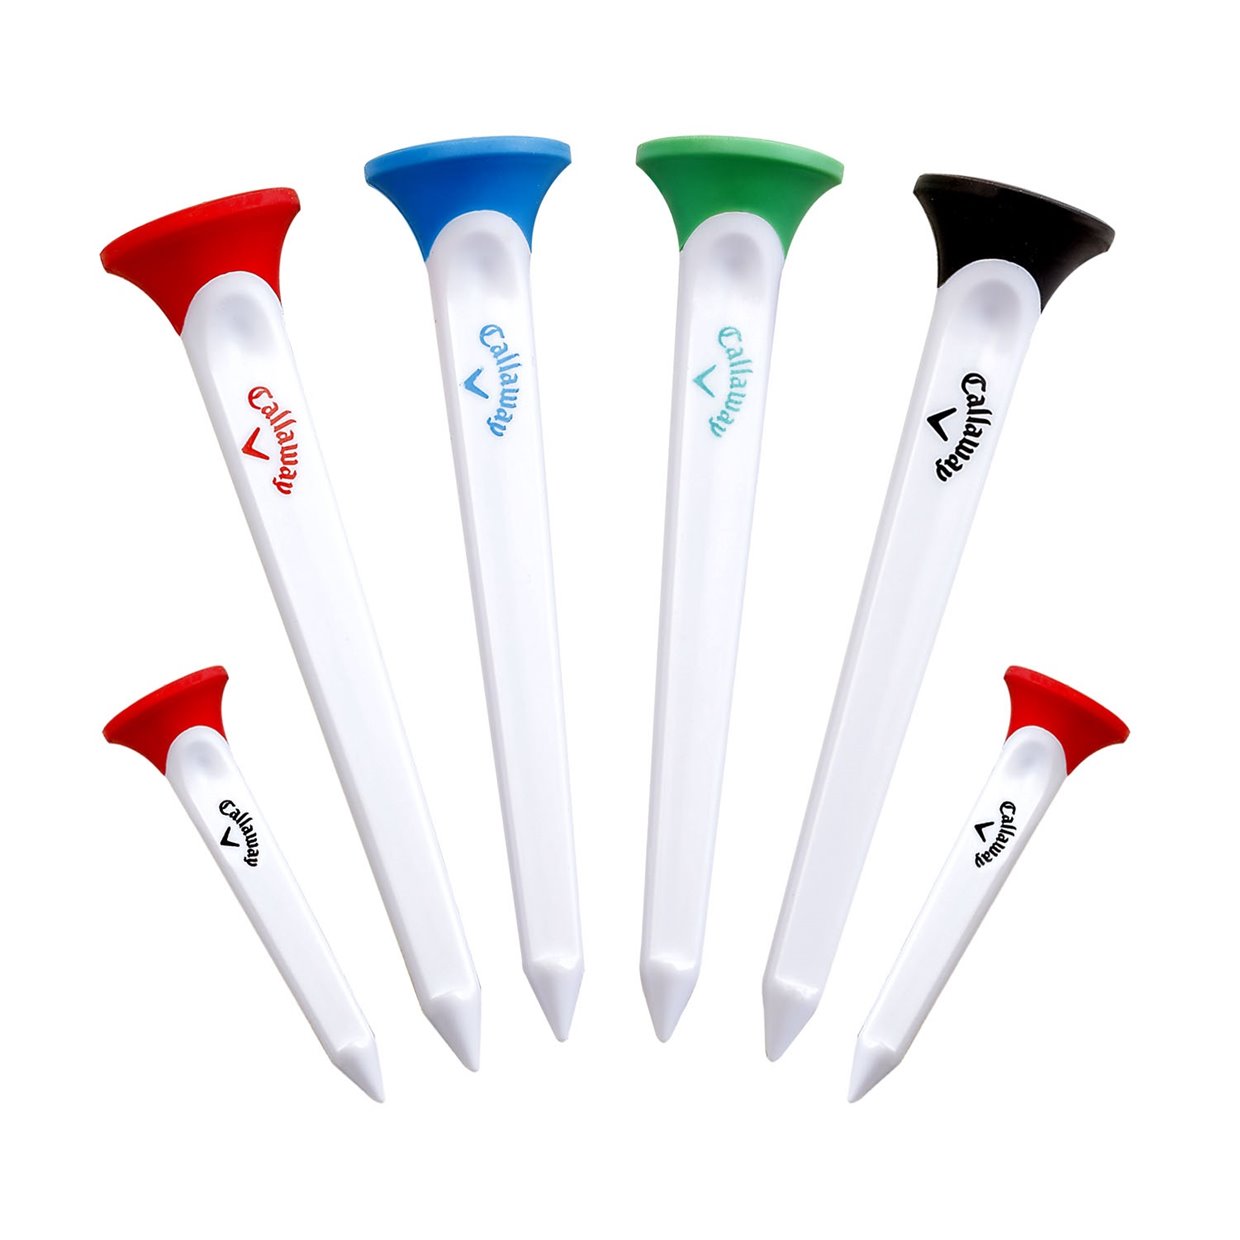 14 Golf Tees For Performance Improvement